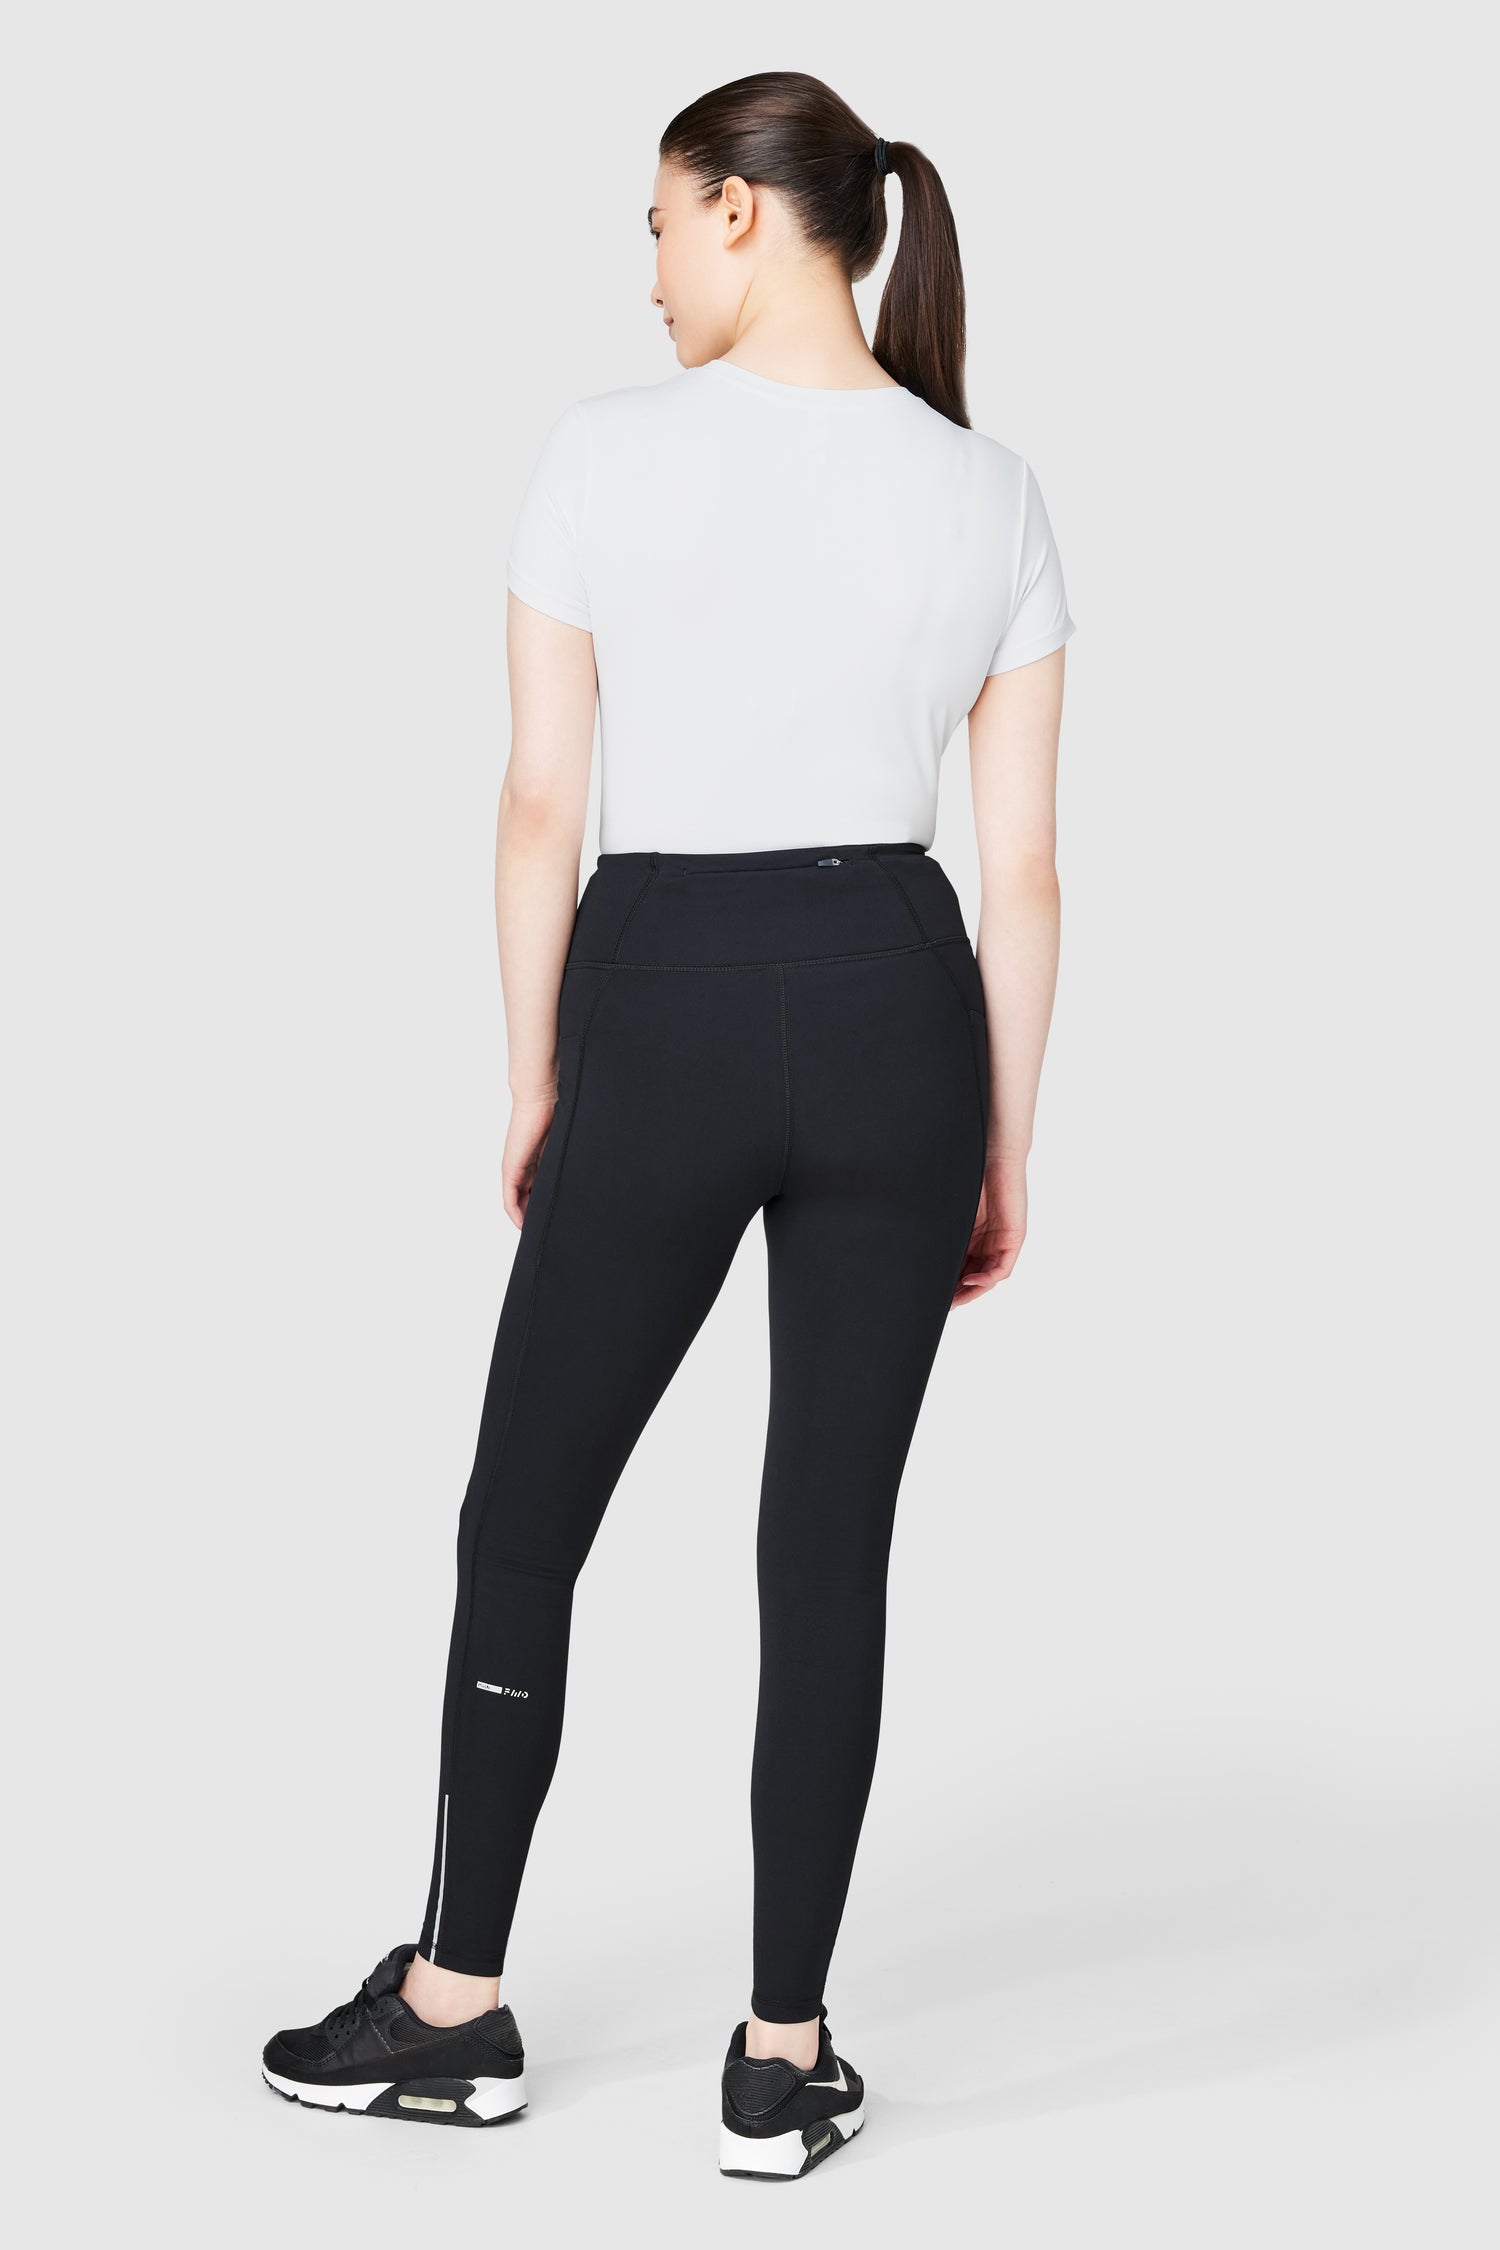 Oysho Leggings Lowest Price - Black Seamless Warmth Technical Ankle-length  Womens